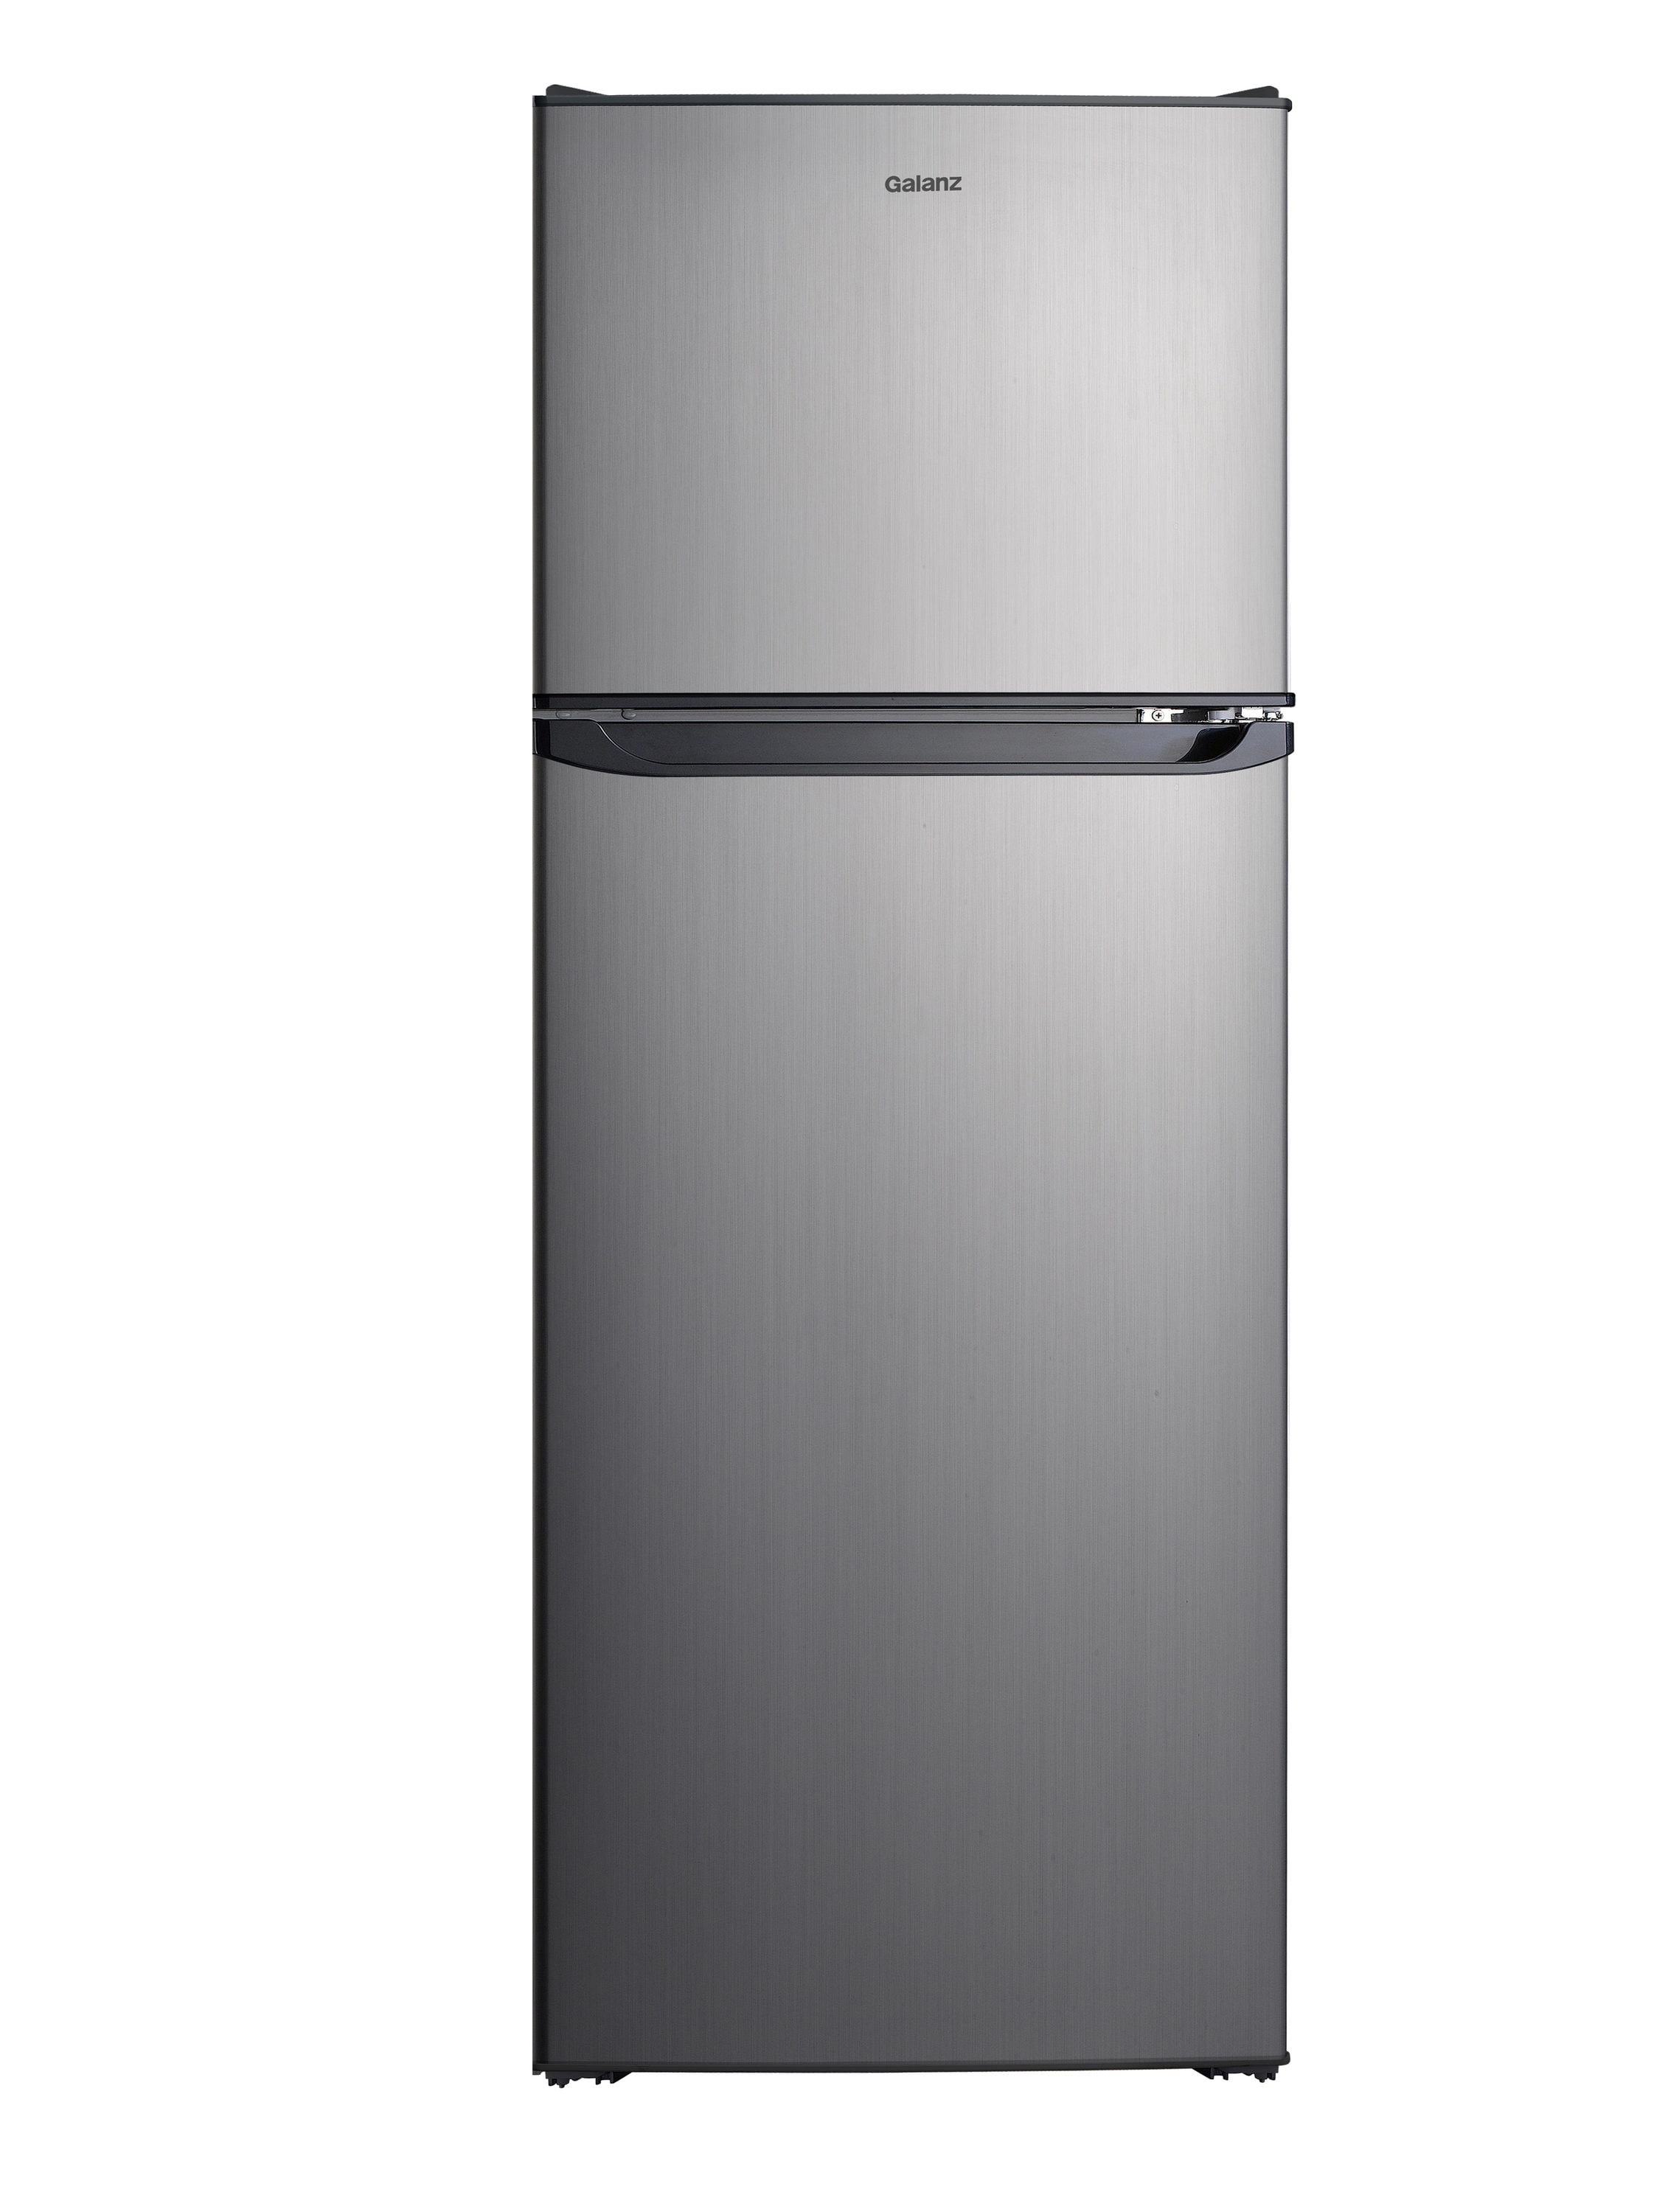 Galanz GLR18FS5S16 French-door refrigerator review - Reviewed